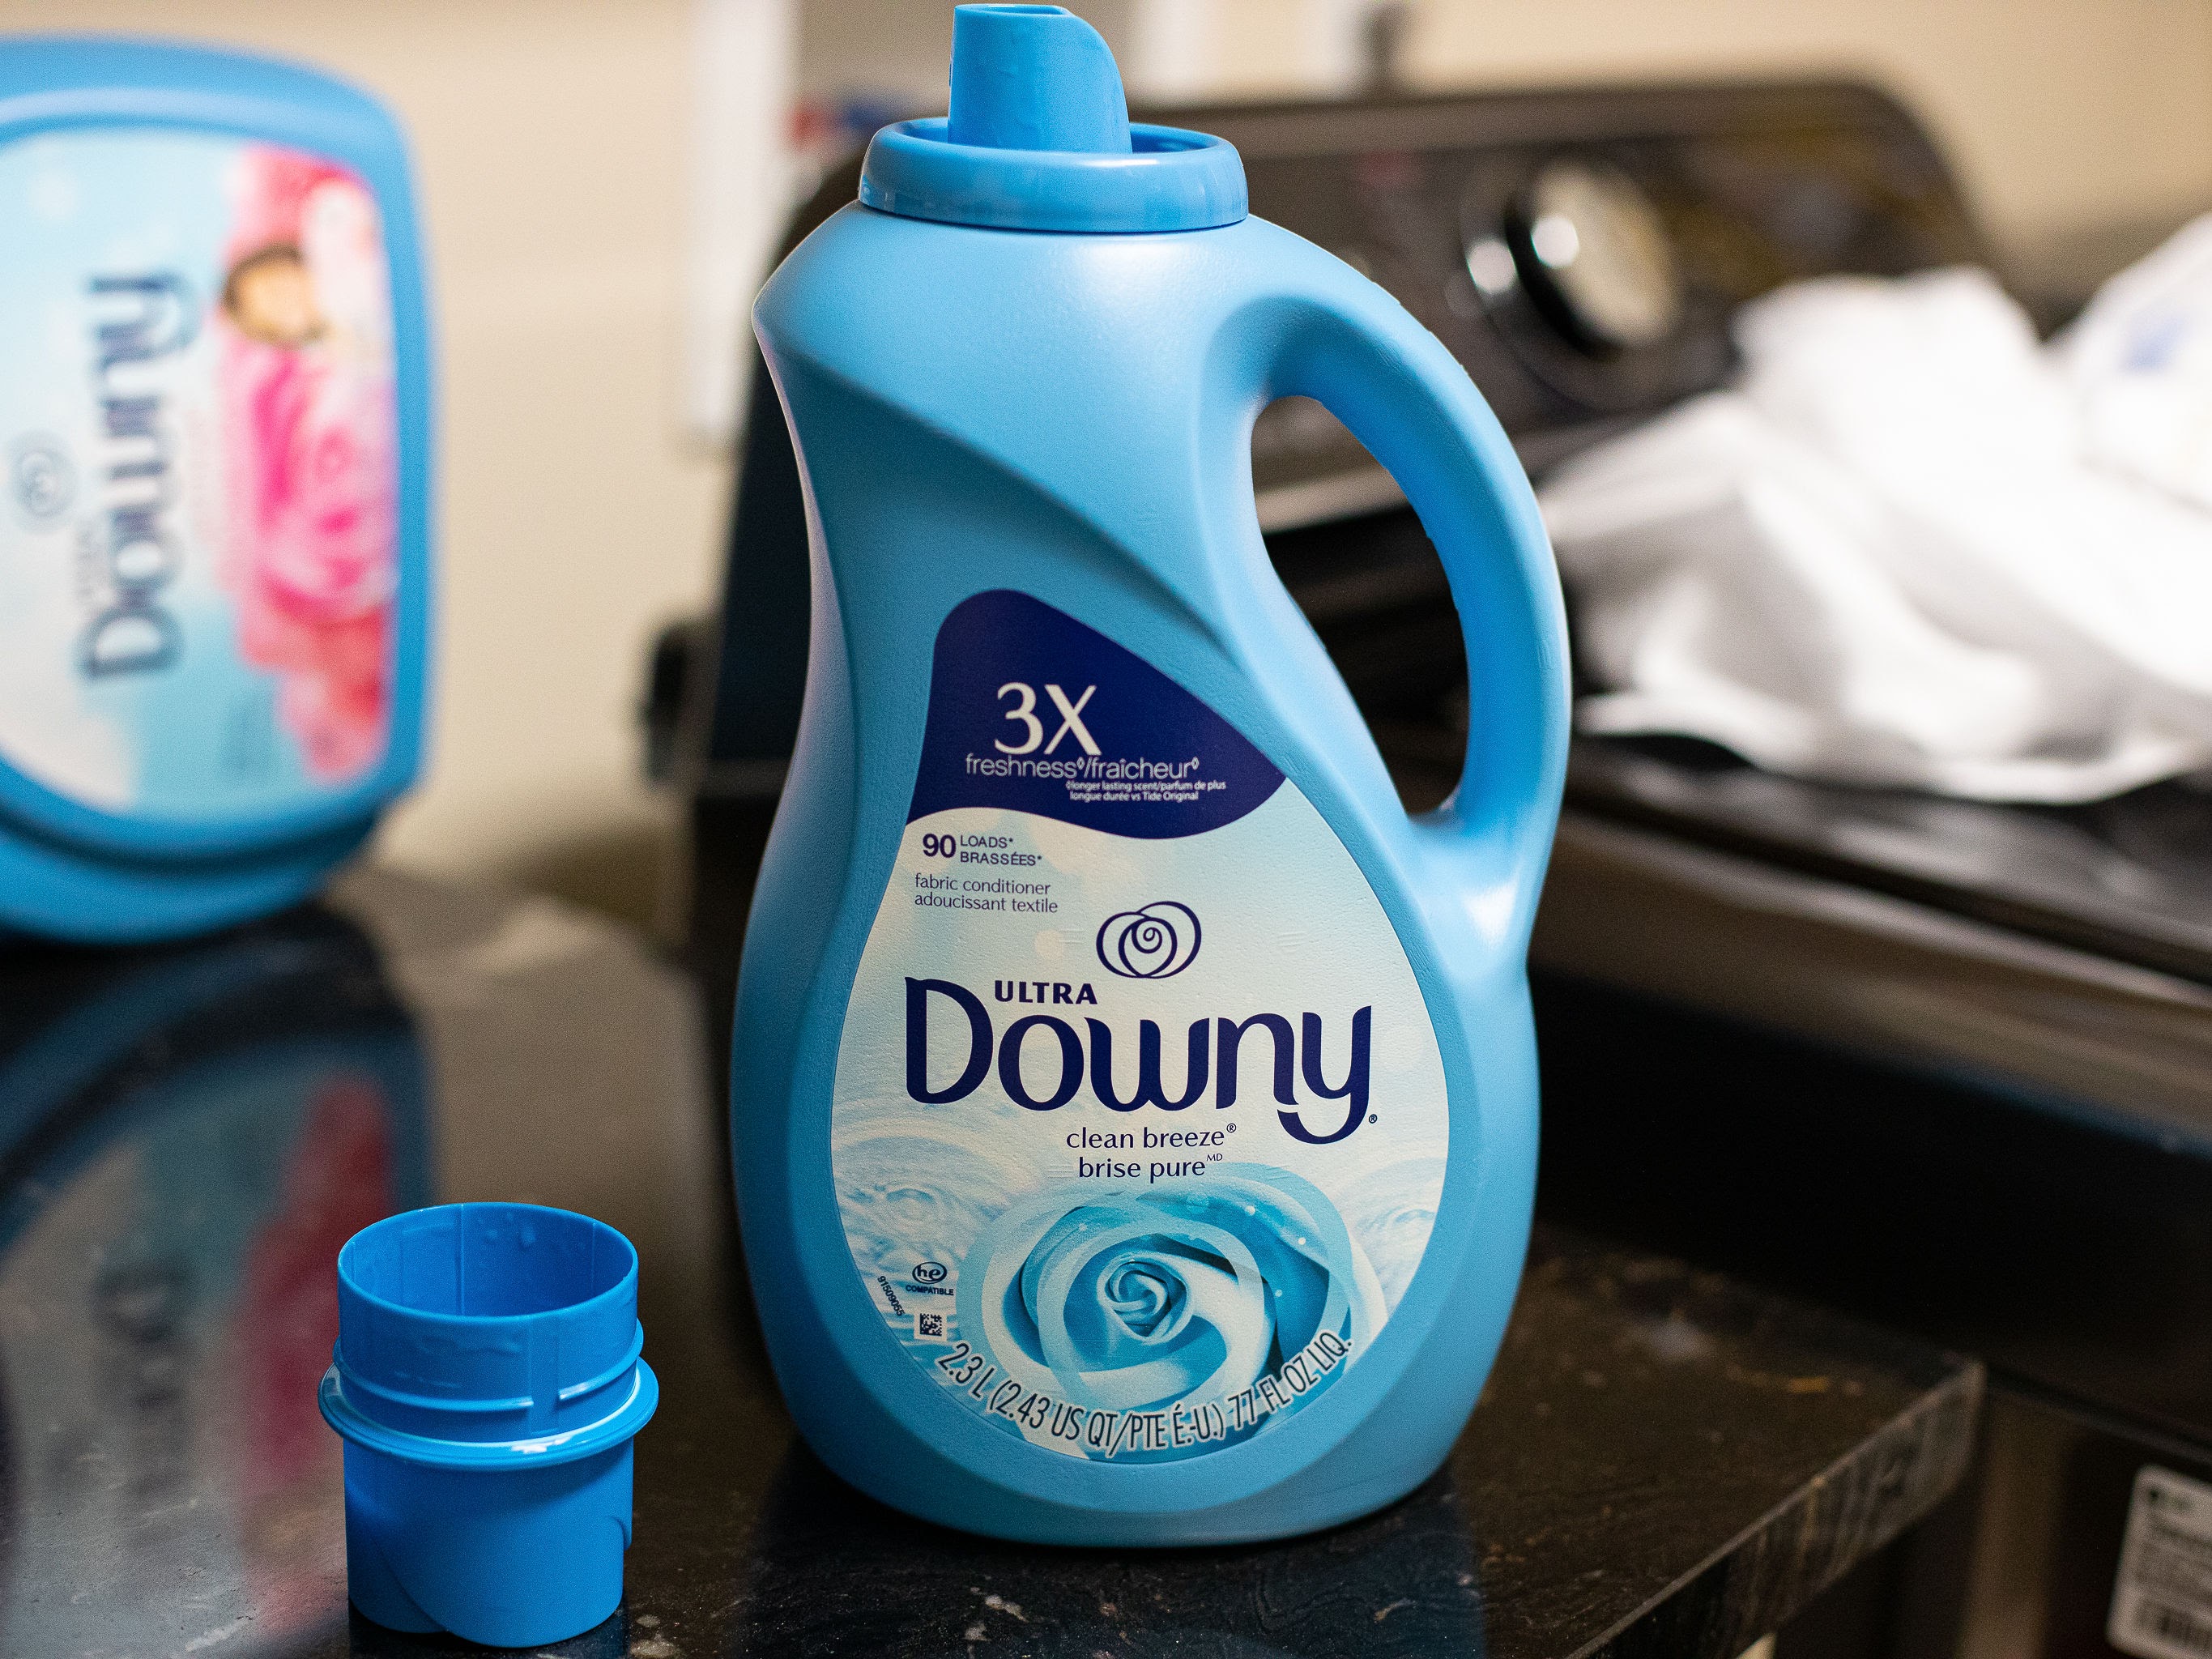 Downy Fabric Softener As Low As $4.99 At Publix (Regular Price $8.99)